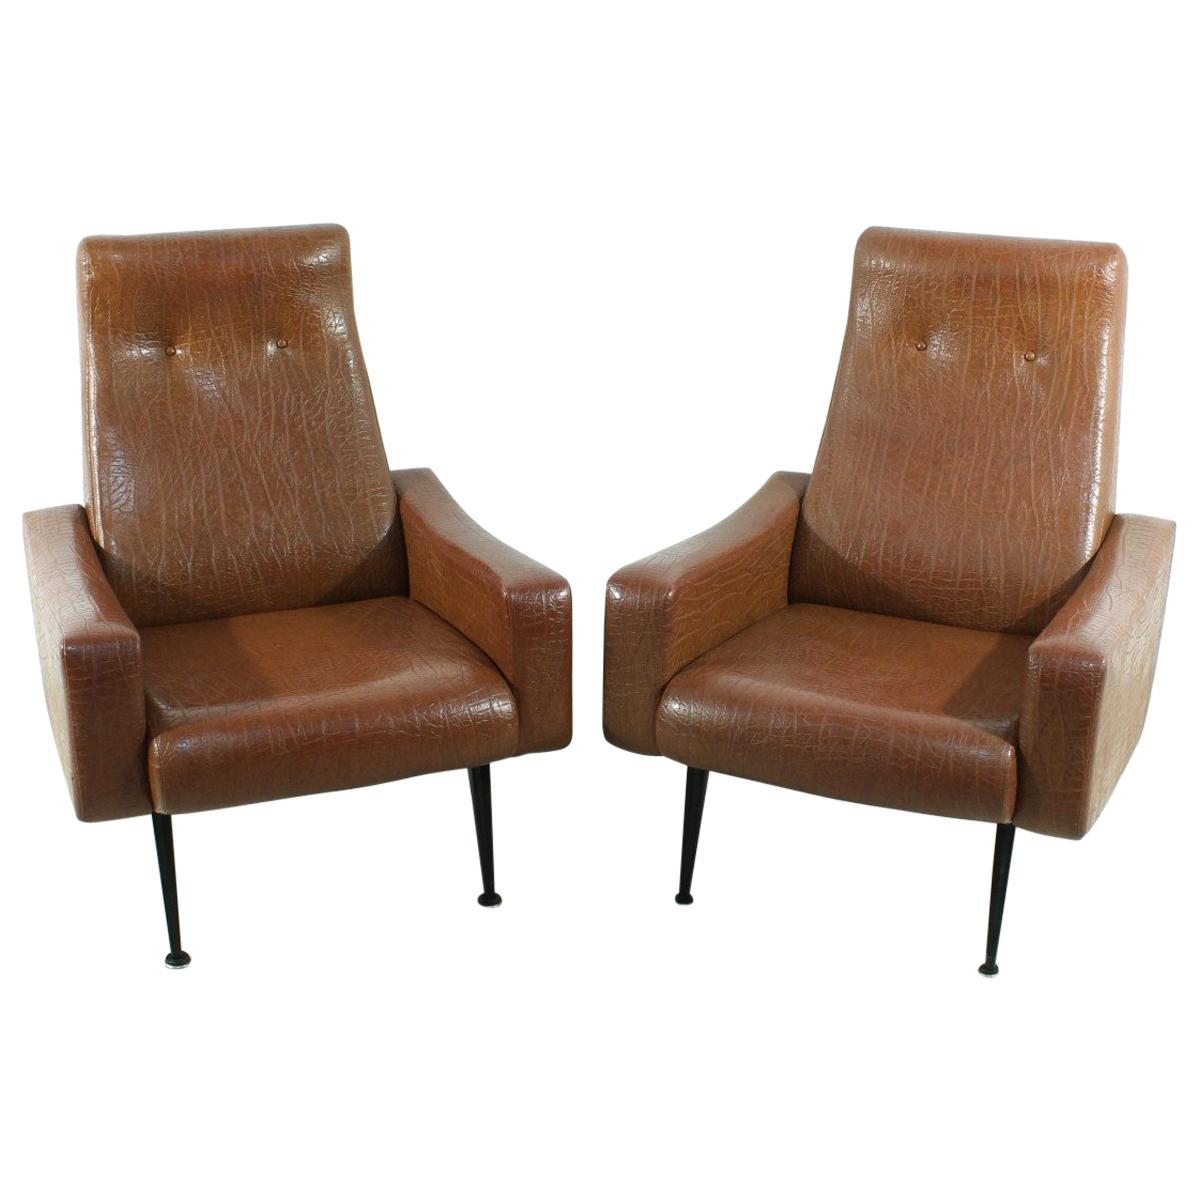 Set of 2 1950s Armchairs